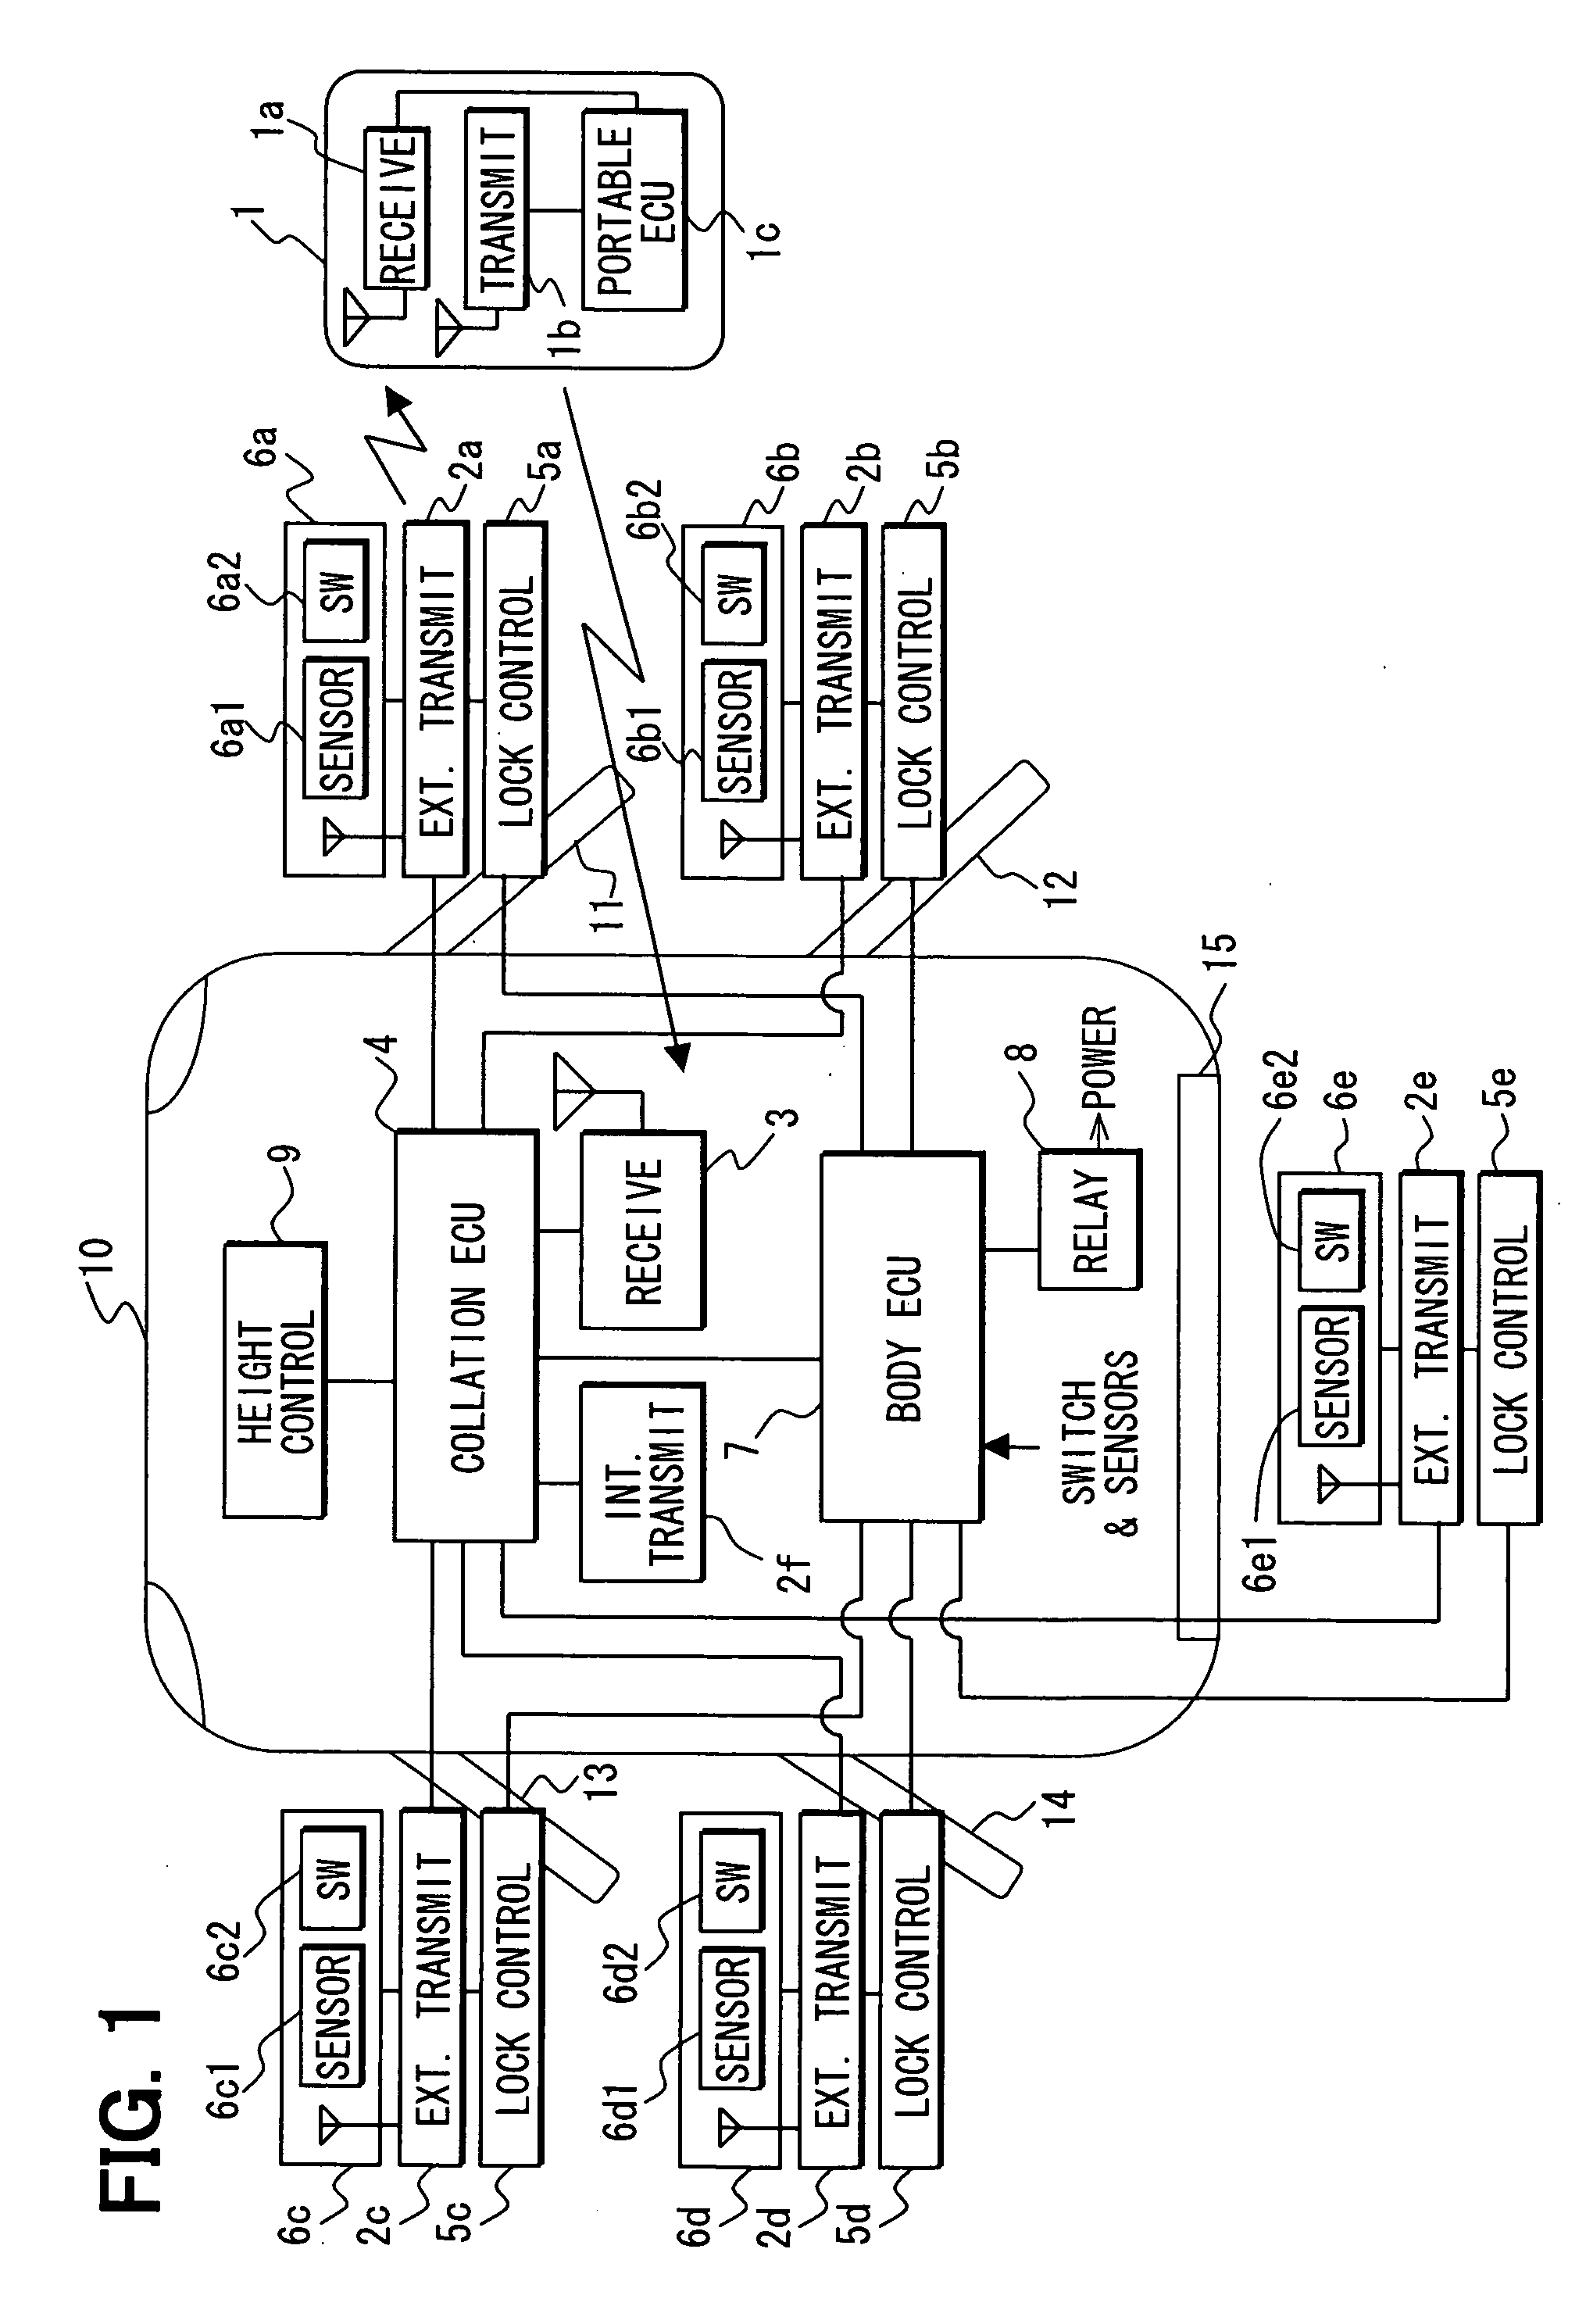 System and method for controlling vehicle equipment